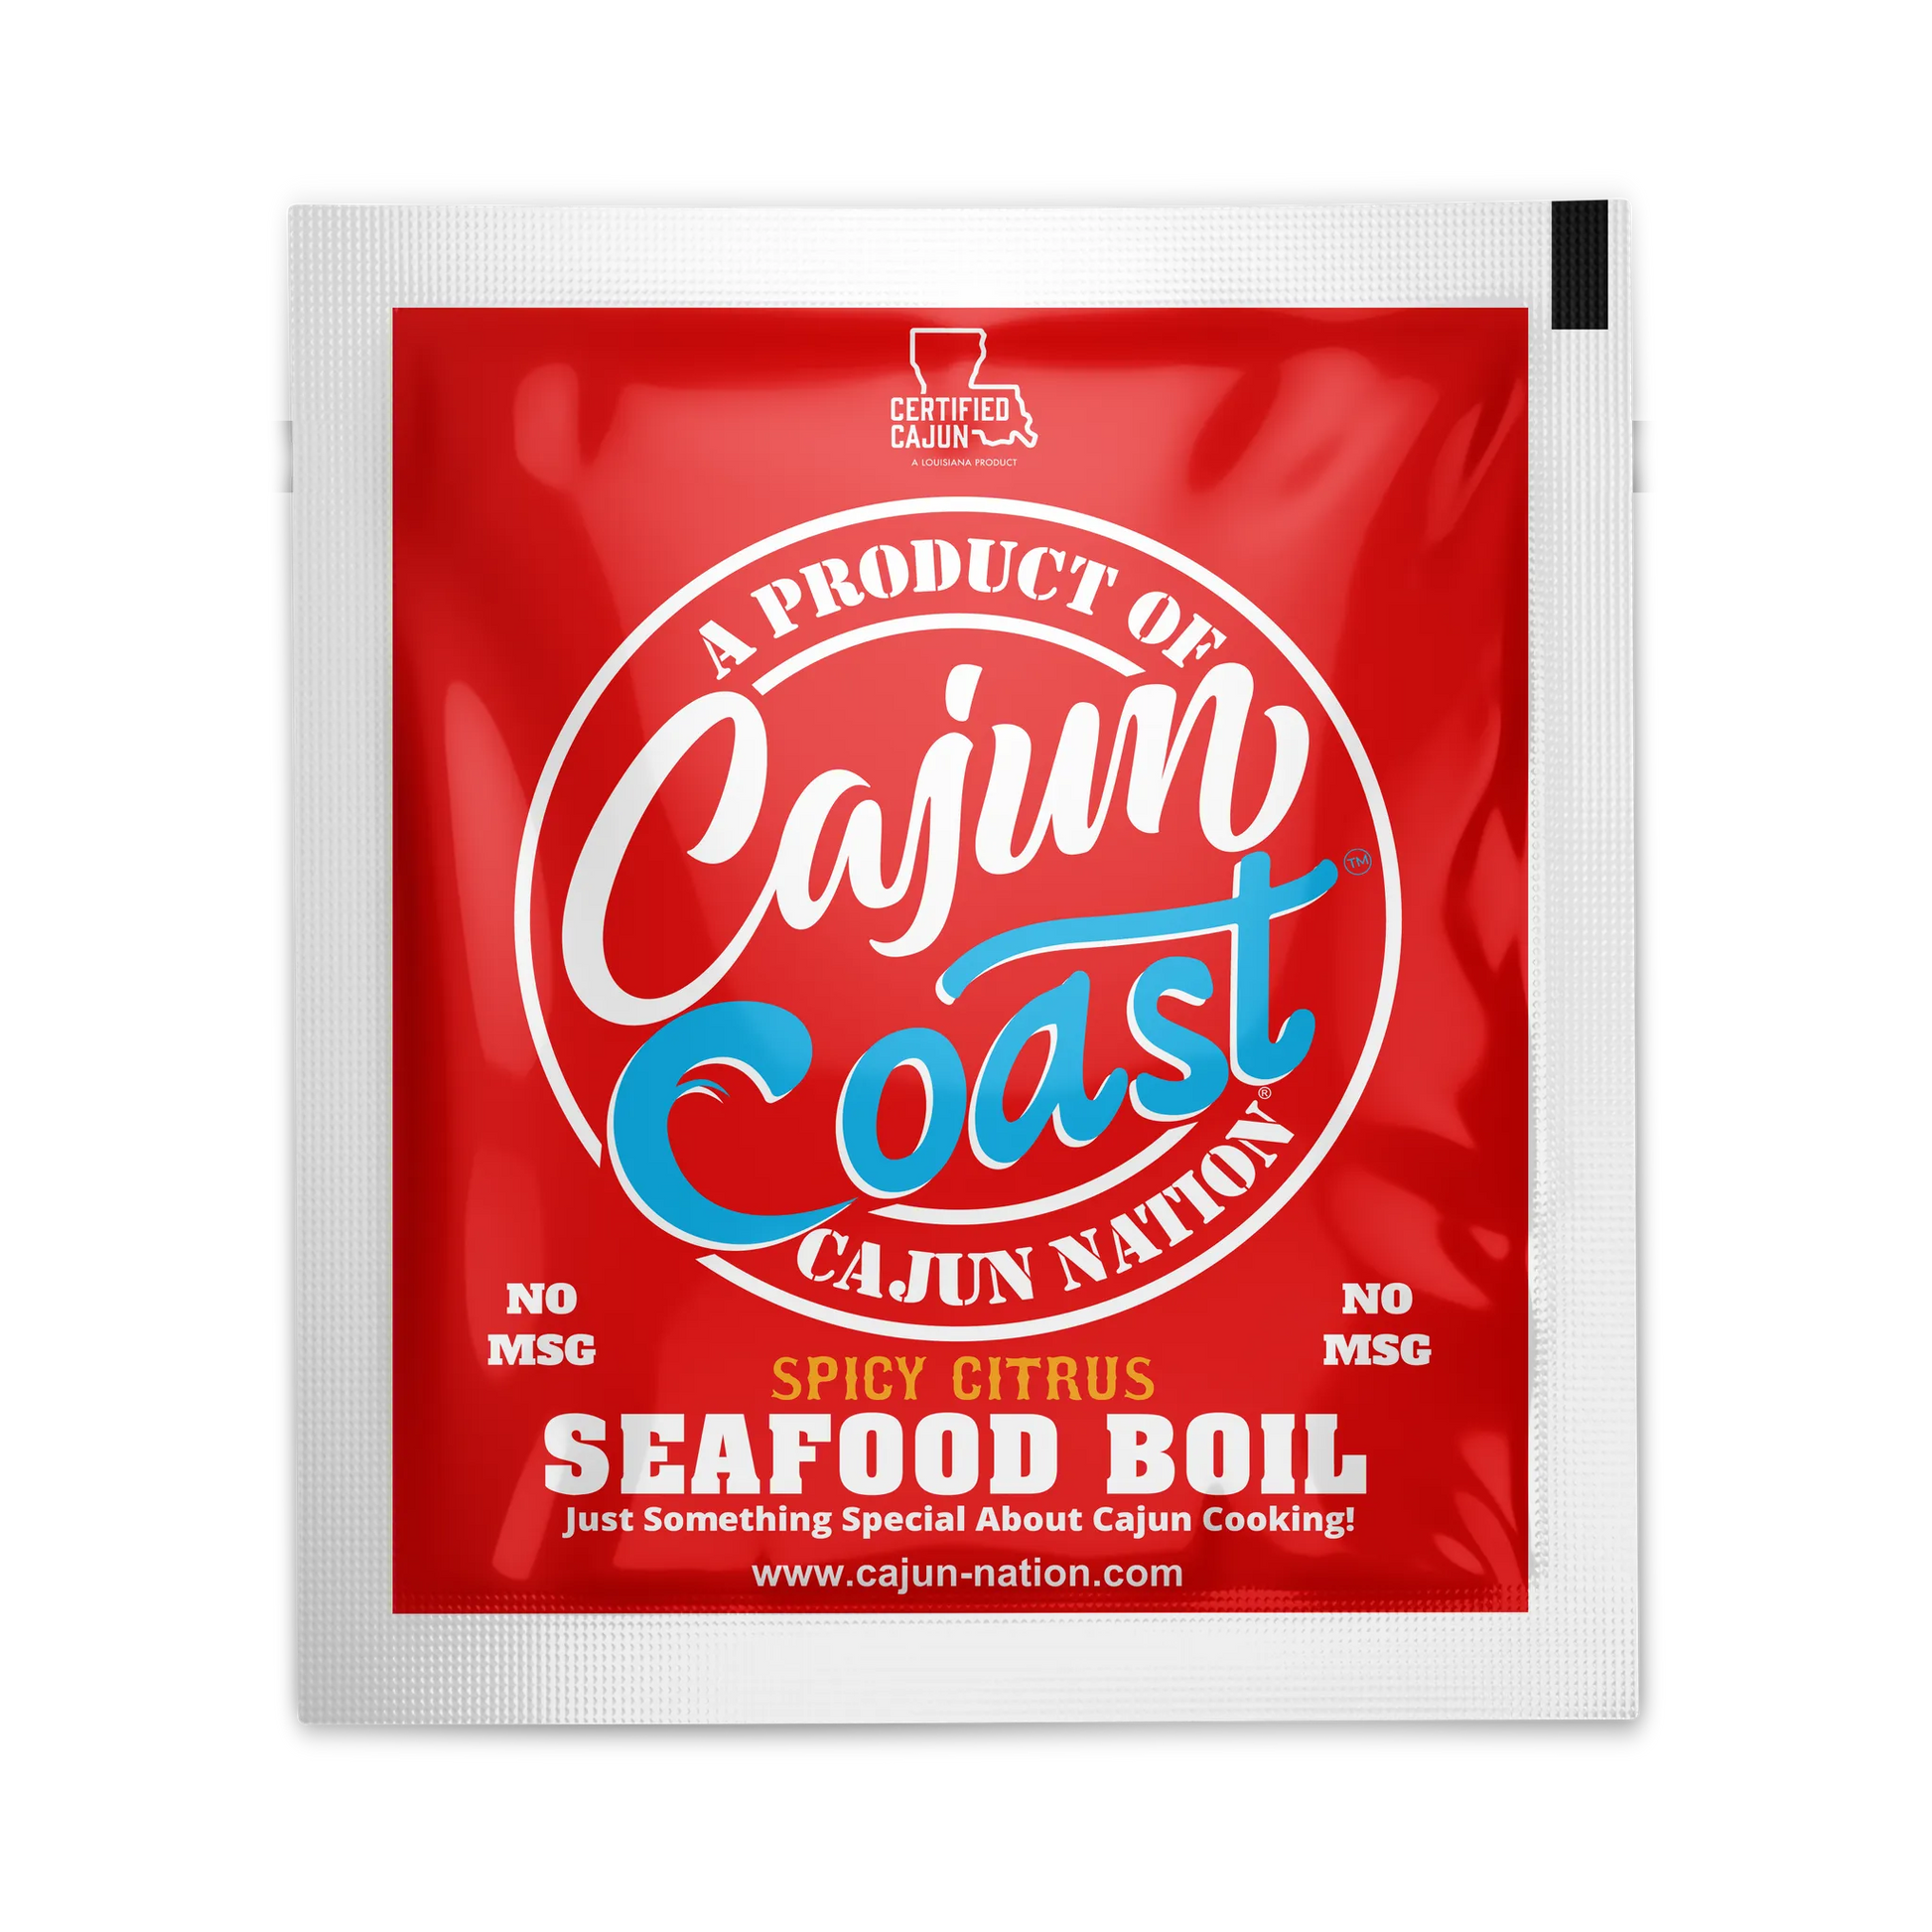 Cajun Coast Spicy Citrus Seasoning Packets with No MSG and Gluten Free is a Certified Cajun product. Blended in Cajun Nation along the Cajun Coast in Southwest Louisiana.